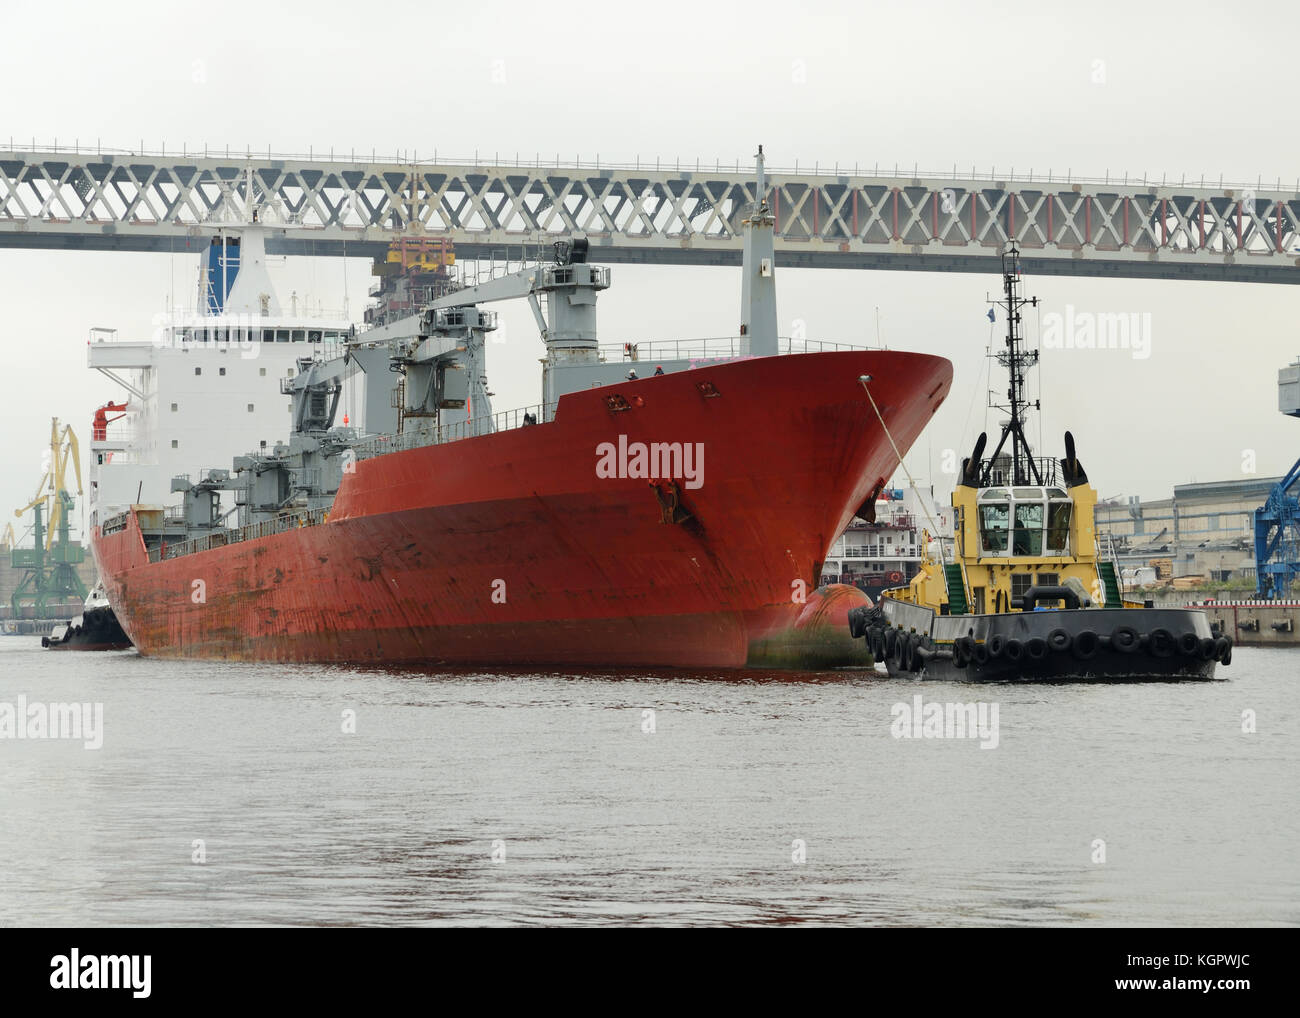 Tugboat pulling a large tanker from the port after it is downloaded. Stock Photo